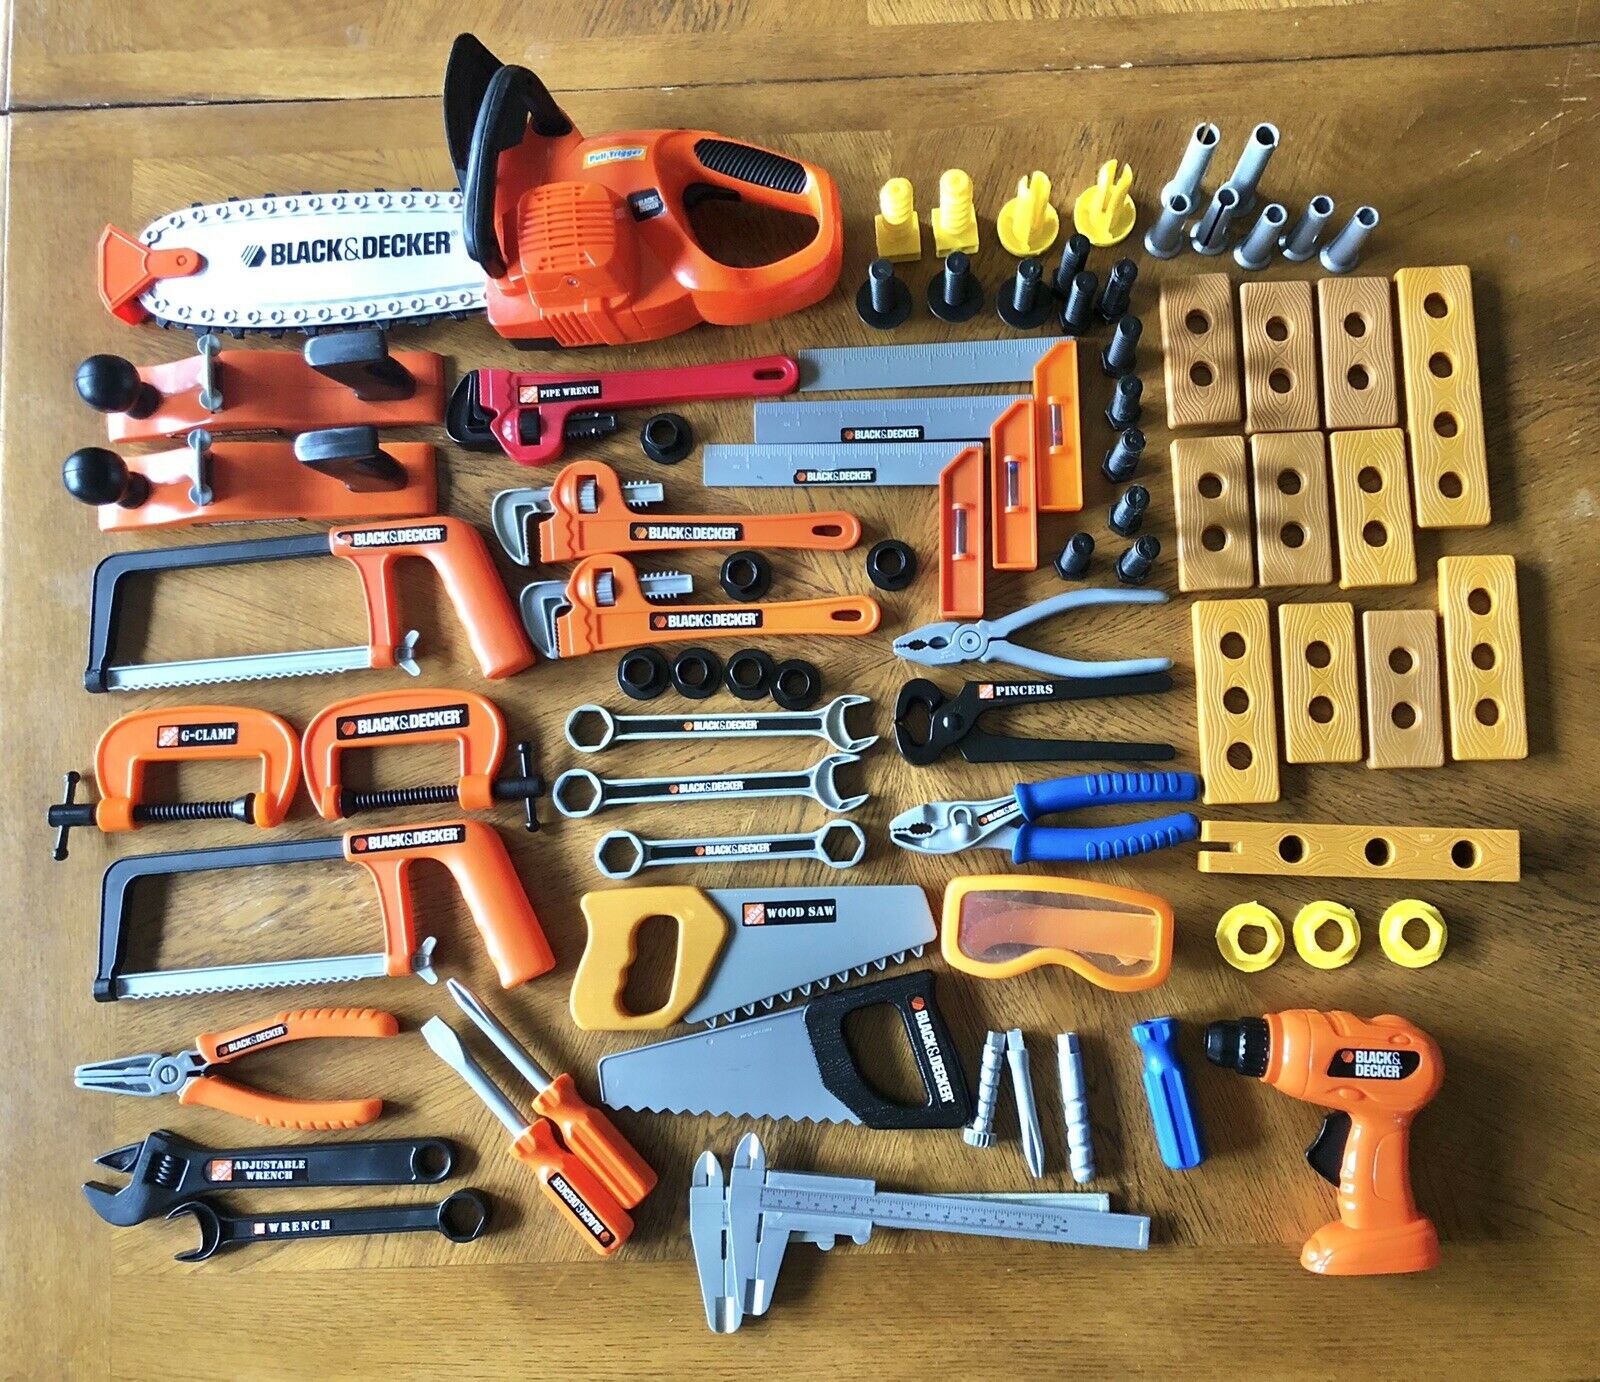 Huge 80 Pc Lot Pretend Play Home Depot Power Tools Chainsaw Black & Decker Toys